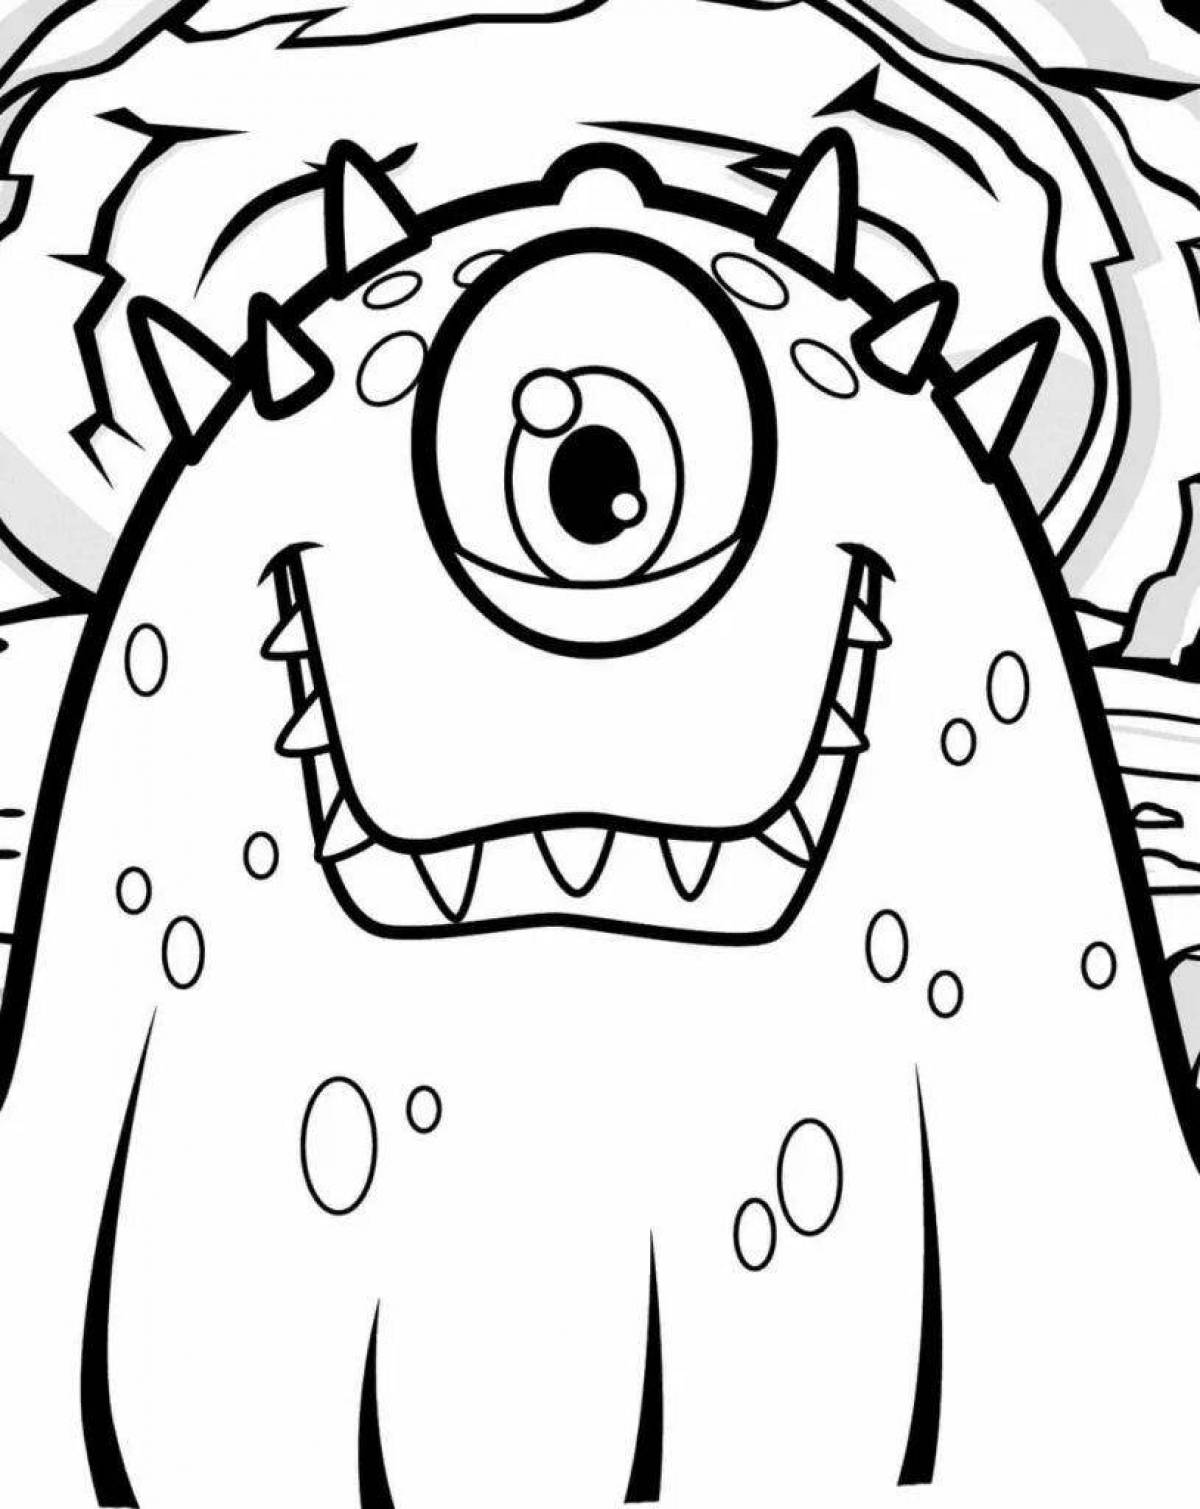 Charming maxi monsters coloring book